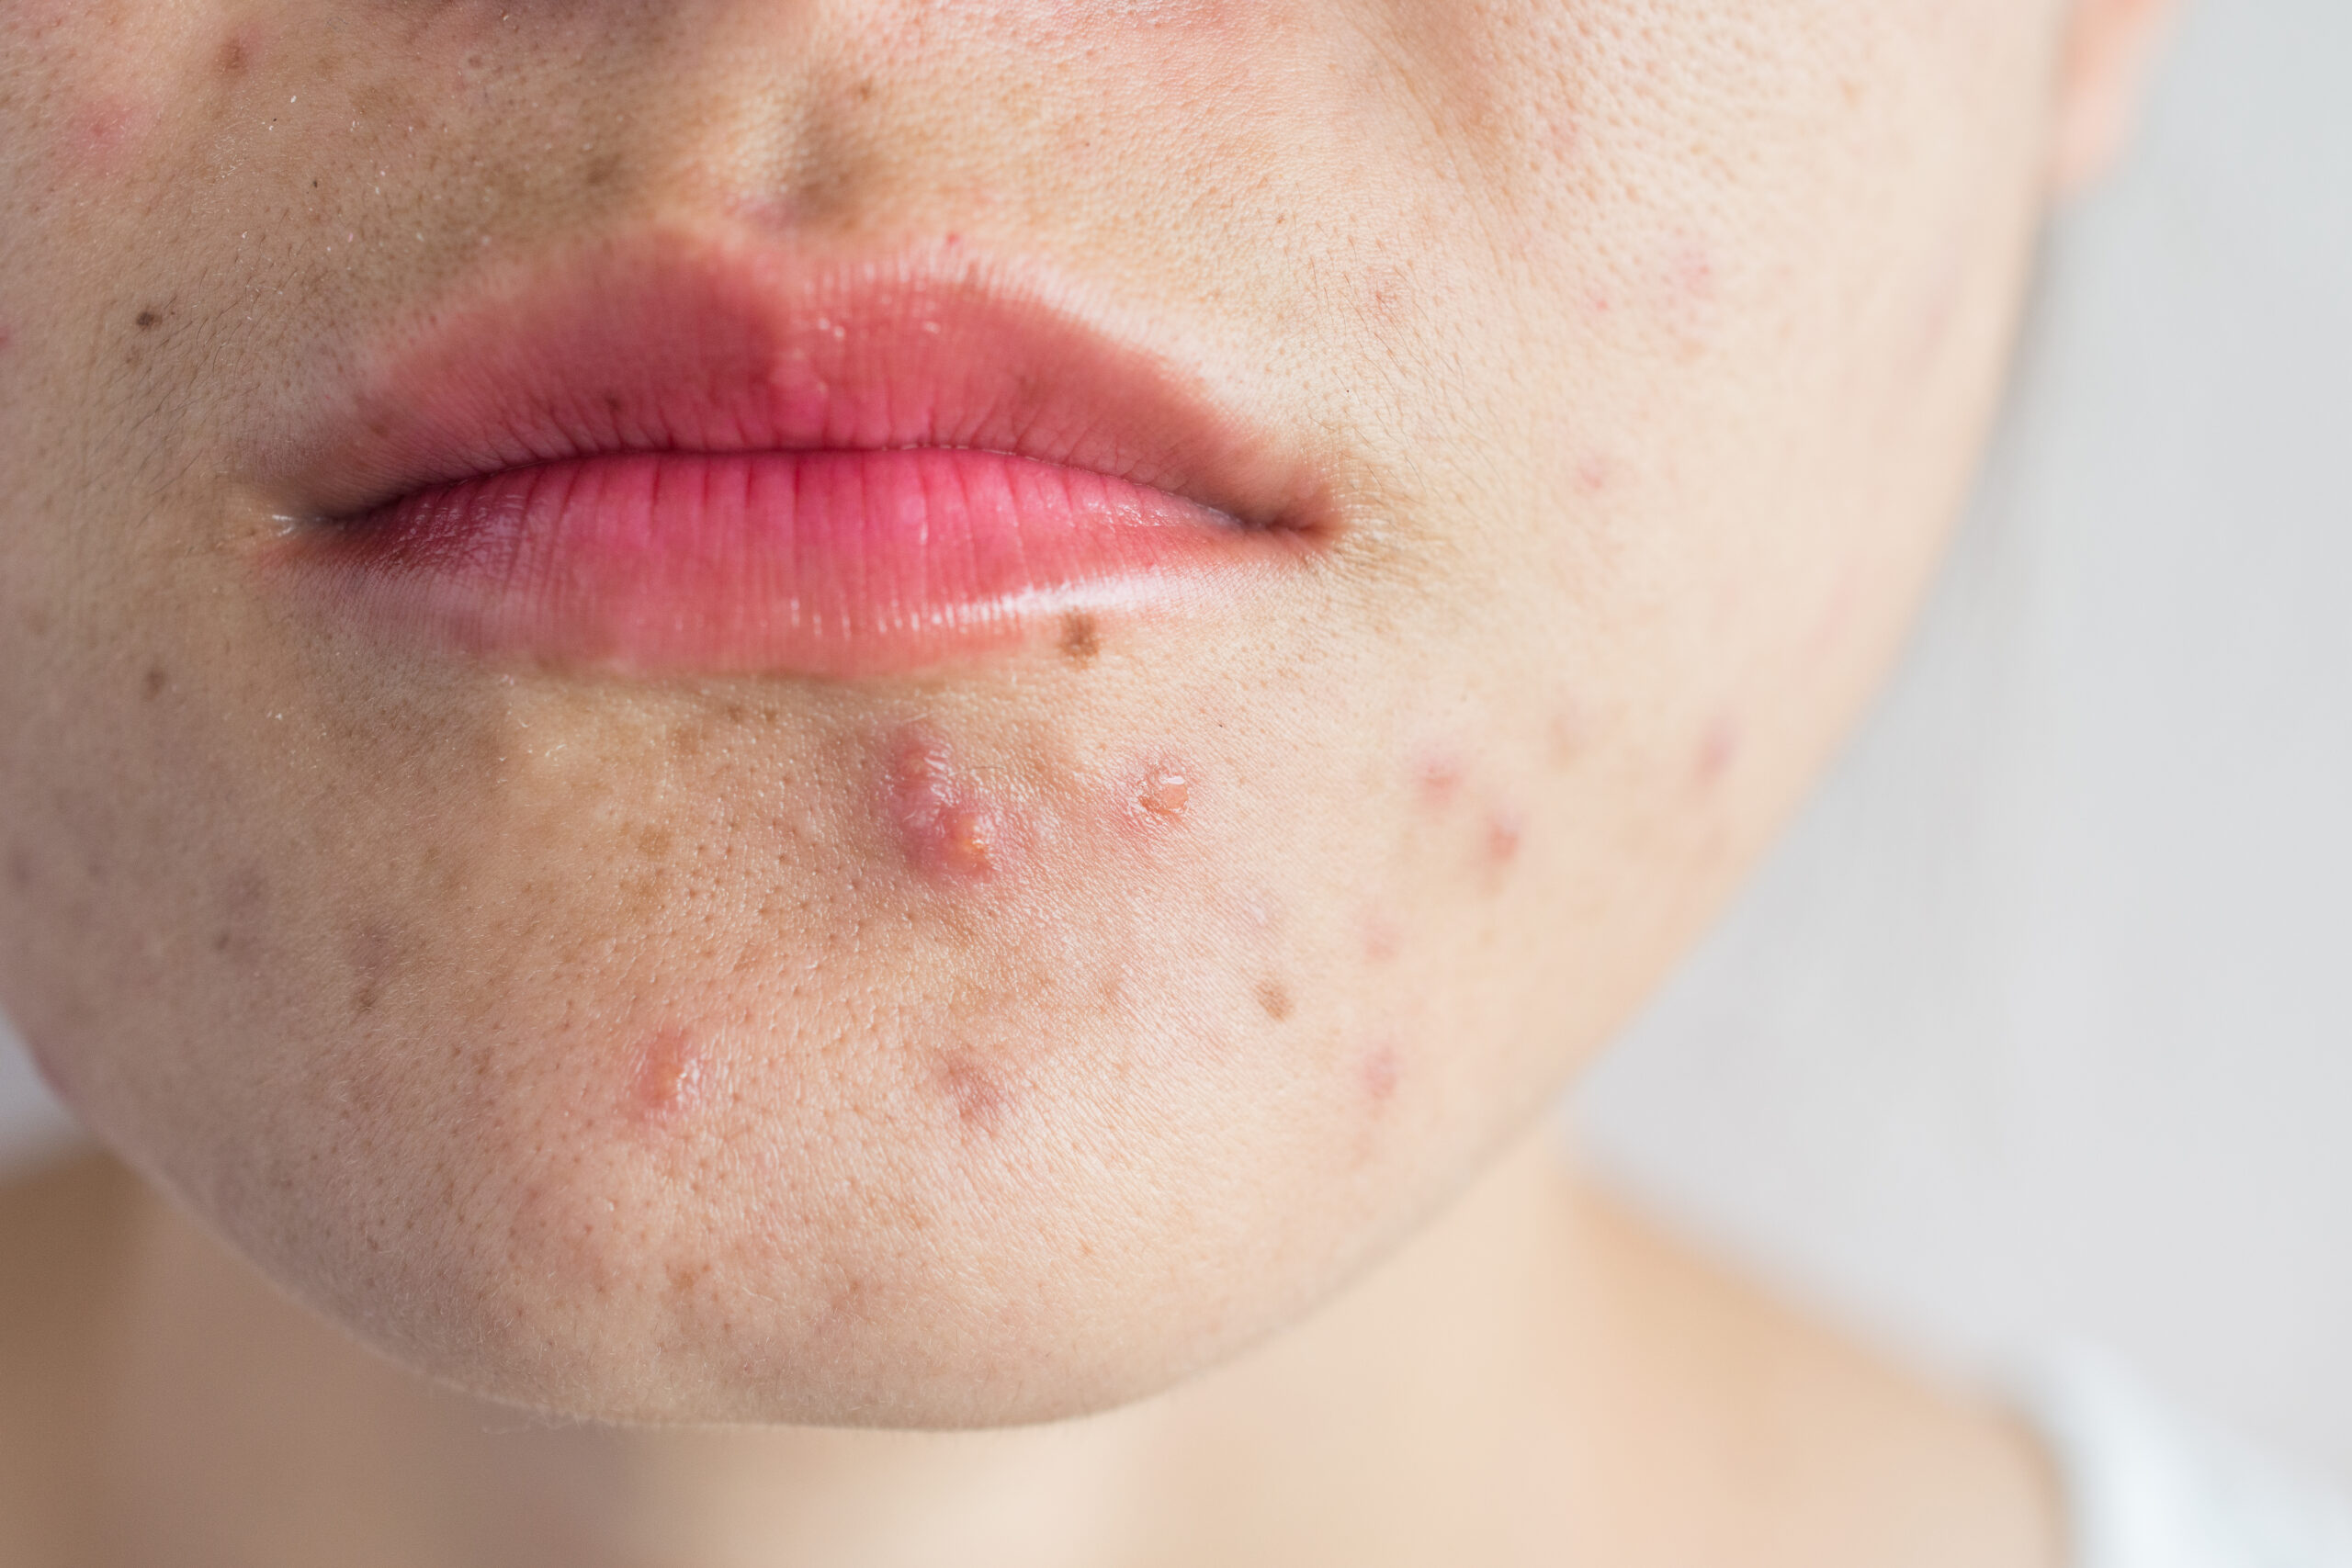 Up close of a face from the nose down with acne